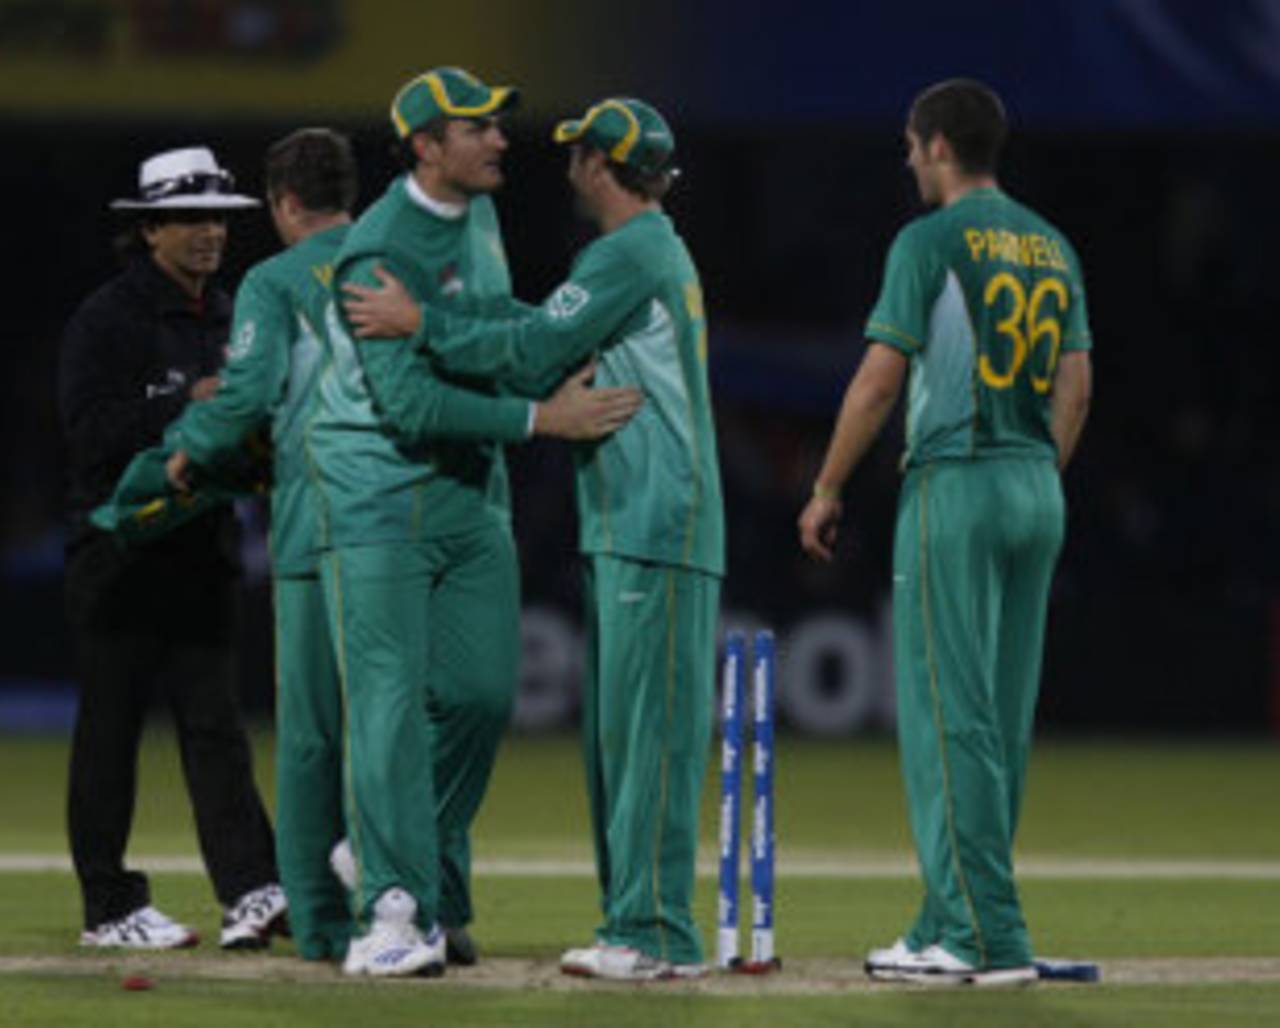 South African players celebrate after their win over New Zealand, New Zealand v South Africa, ICC World Twenty20, Group D, Lord's, June 9, 2009
